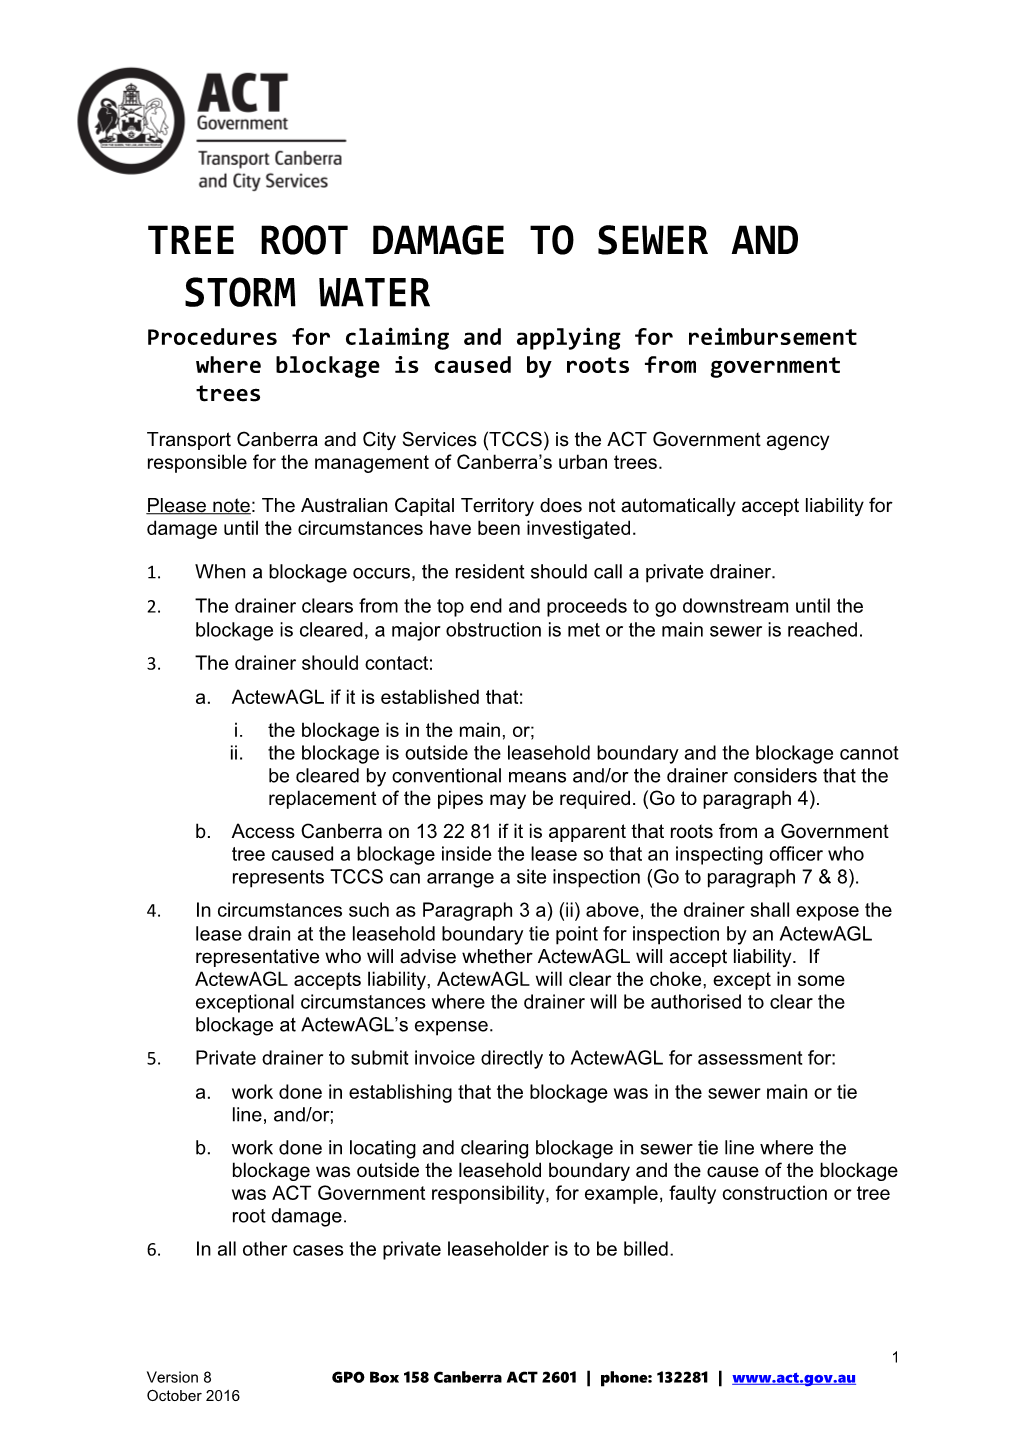 Tree Root Damage to Sewer and Storm Water